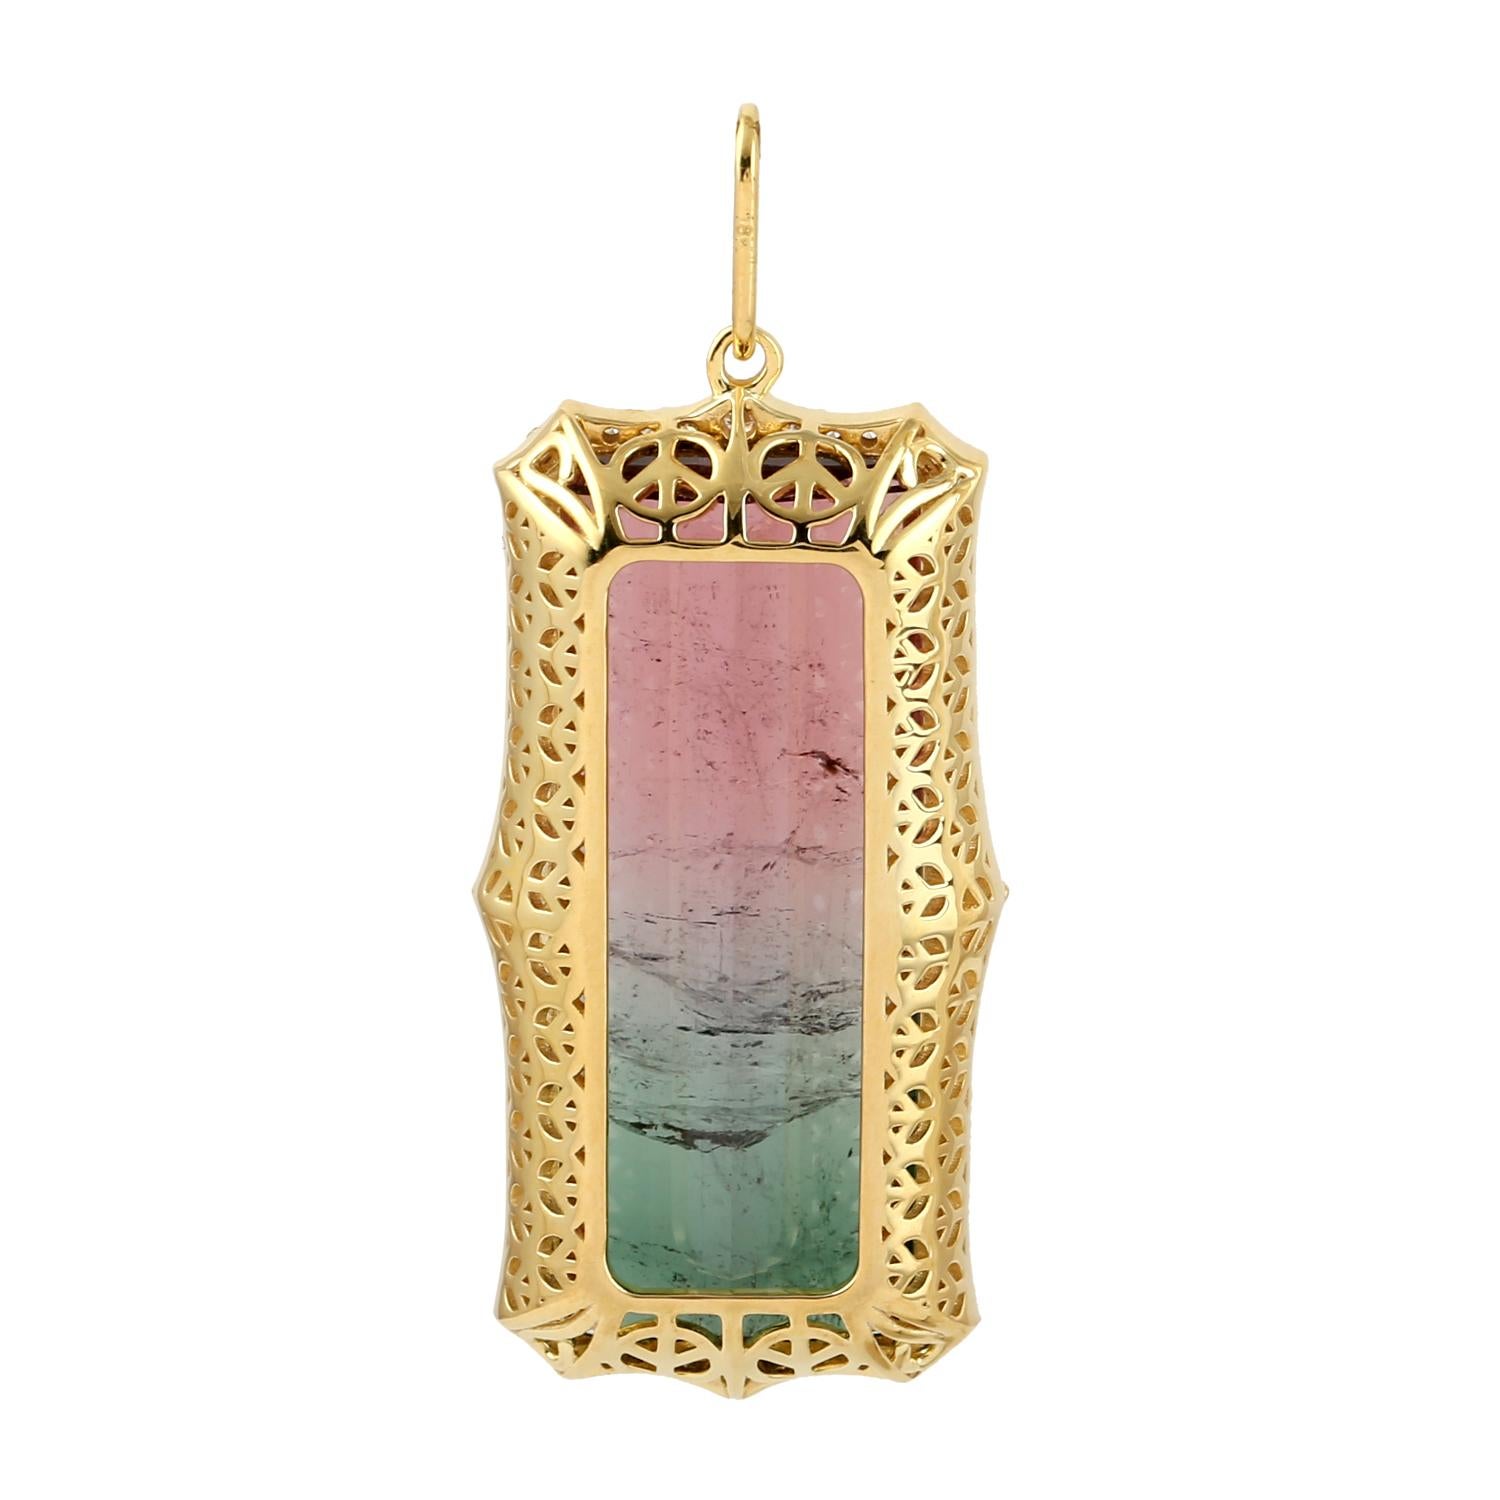 Contemporary 26.46 ct Watermelon Tourmaline Pendant With Diamonds Made In 18k Yellow Gold For Sale